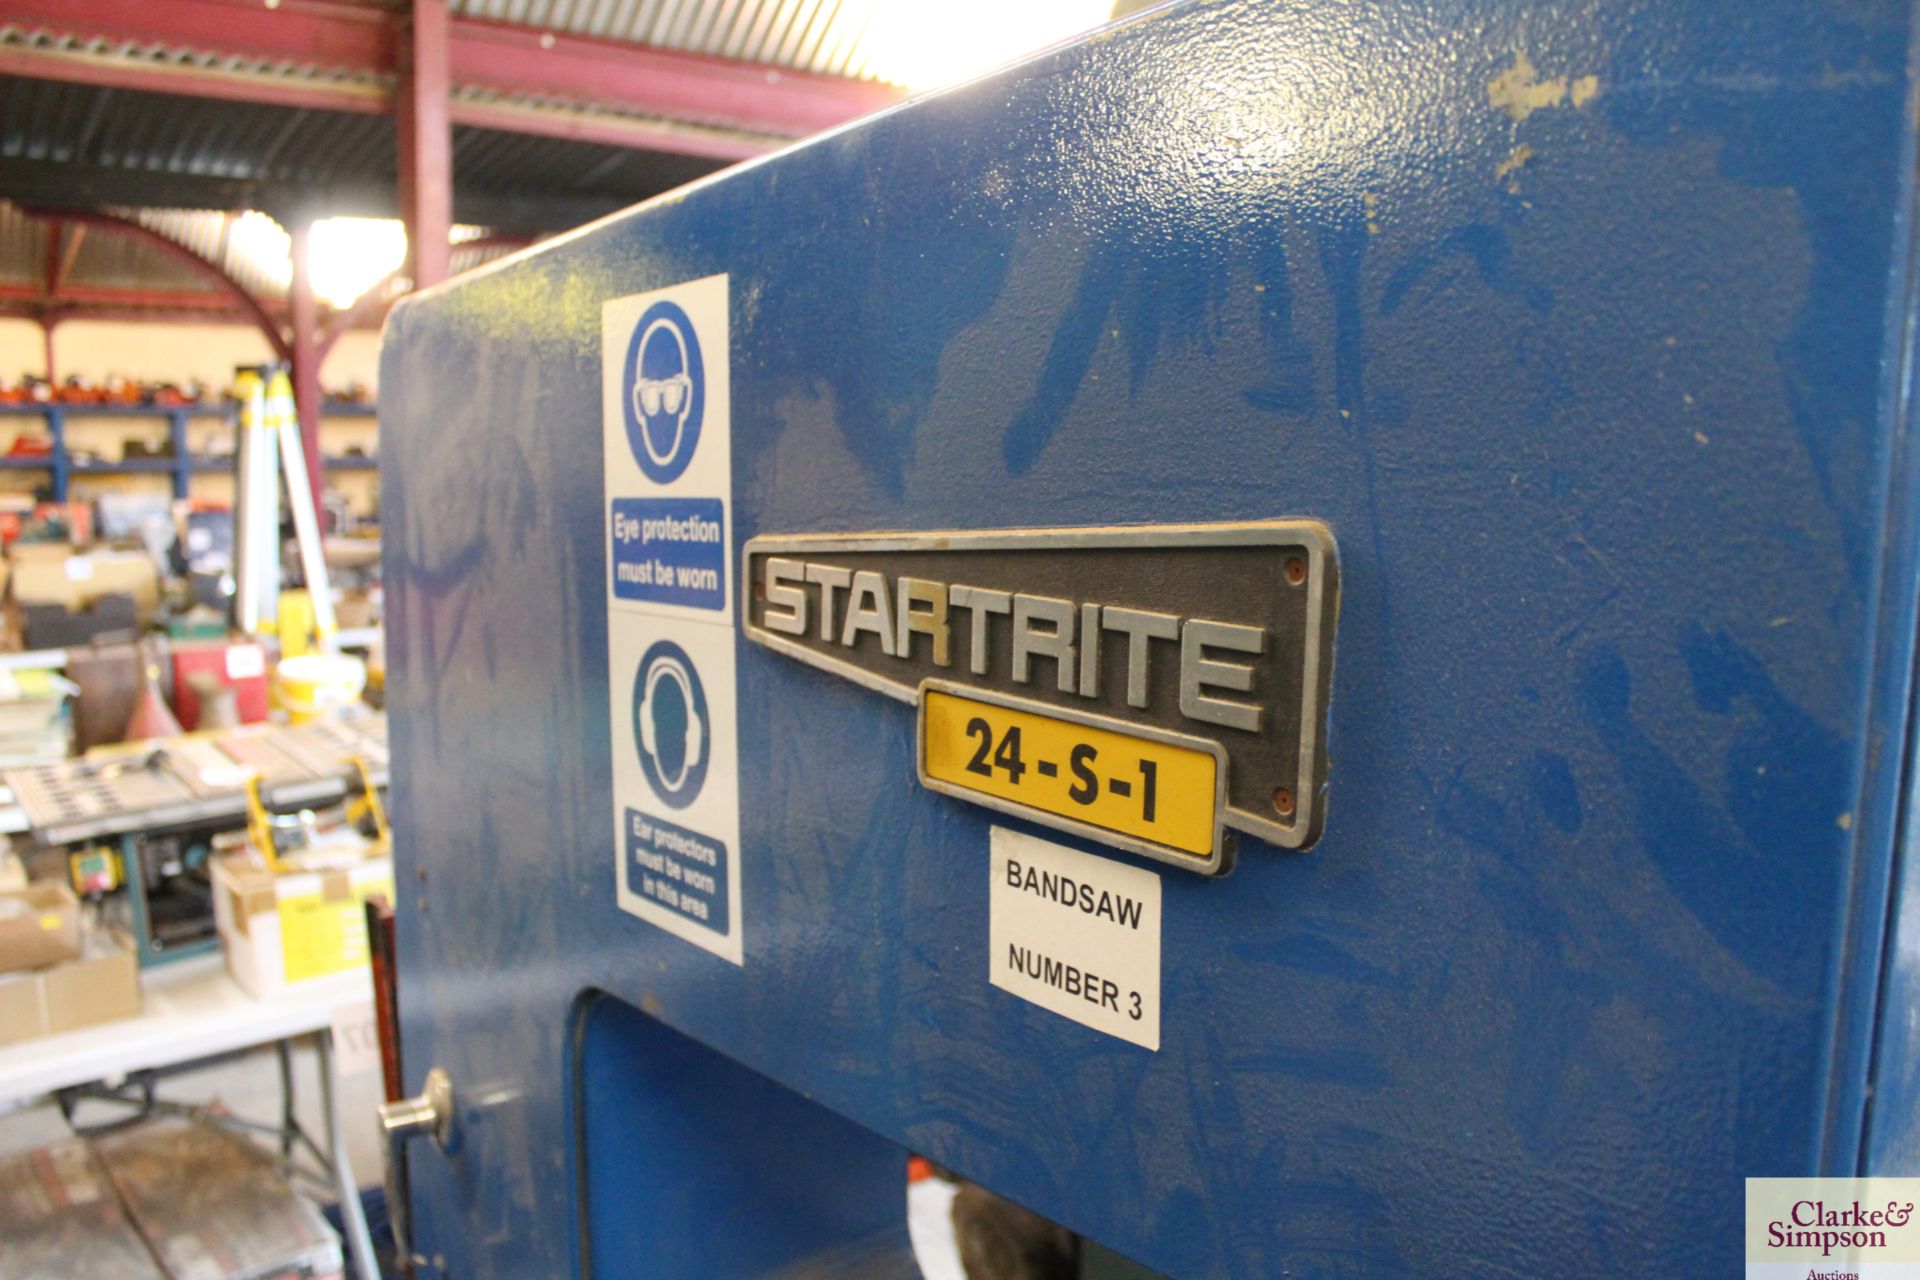 Startrite 24-S-1 band saw. - Image 5 of 5